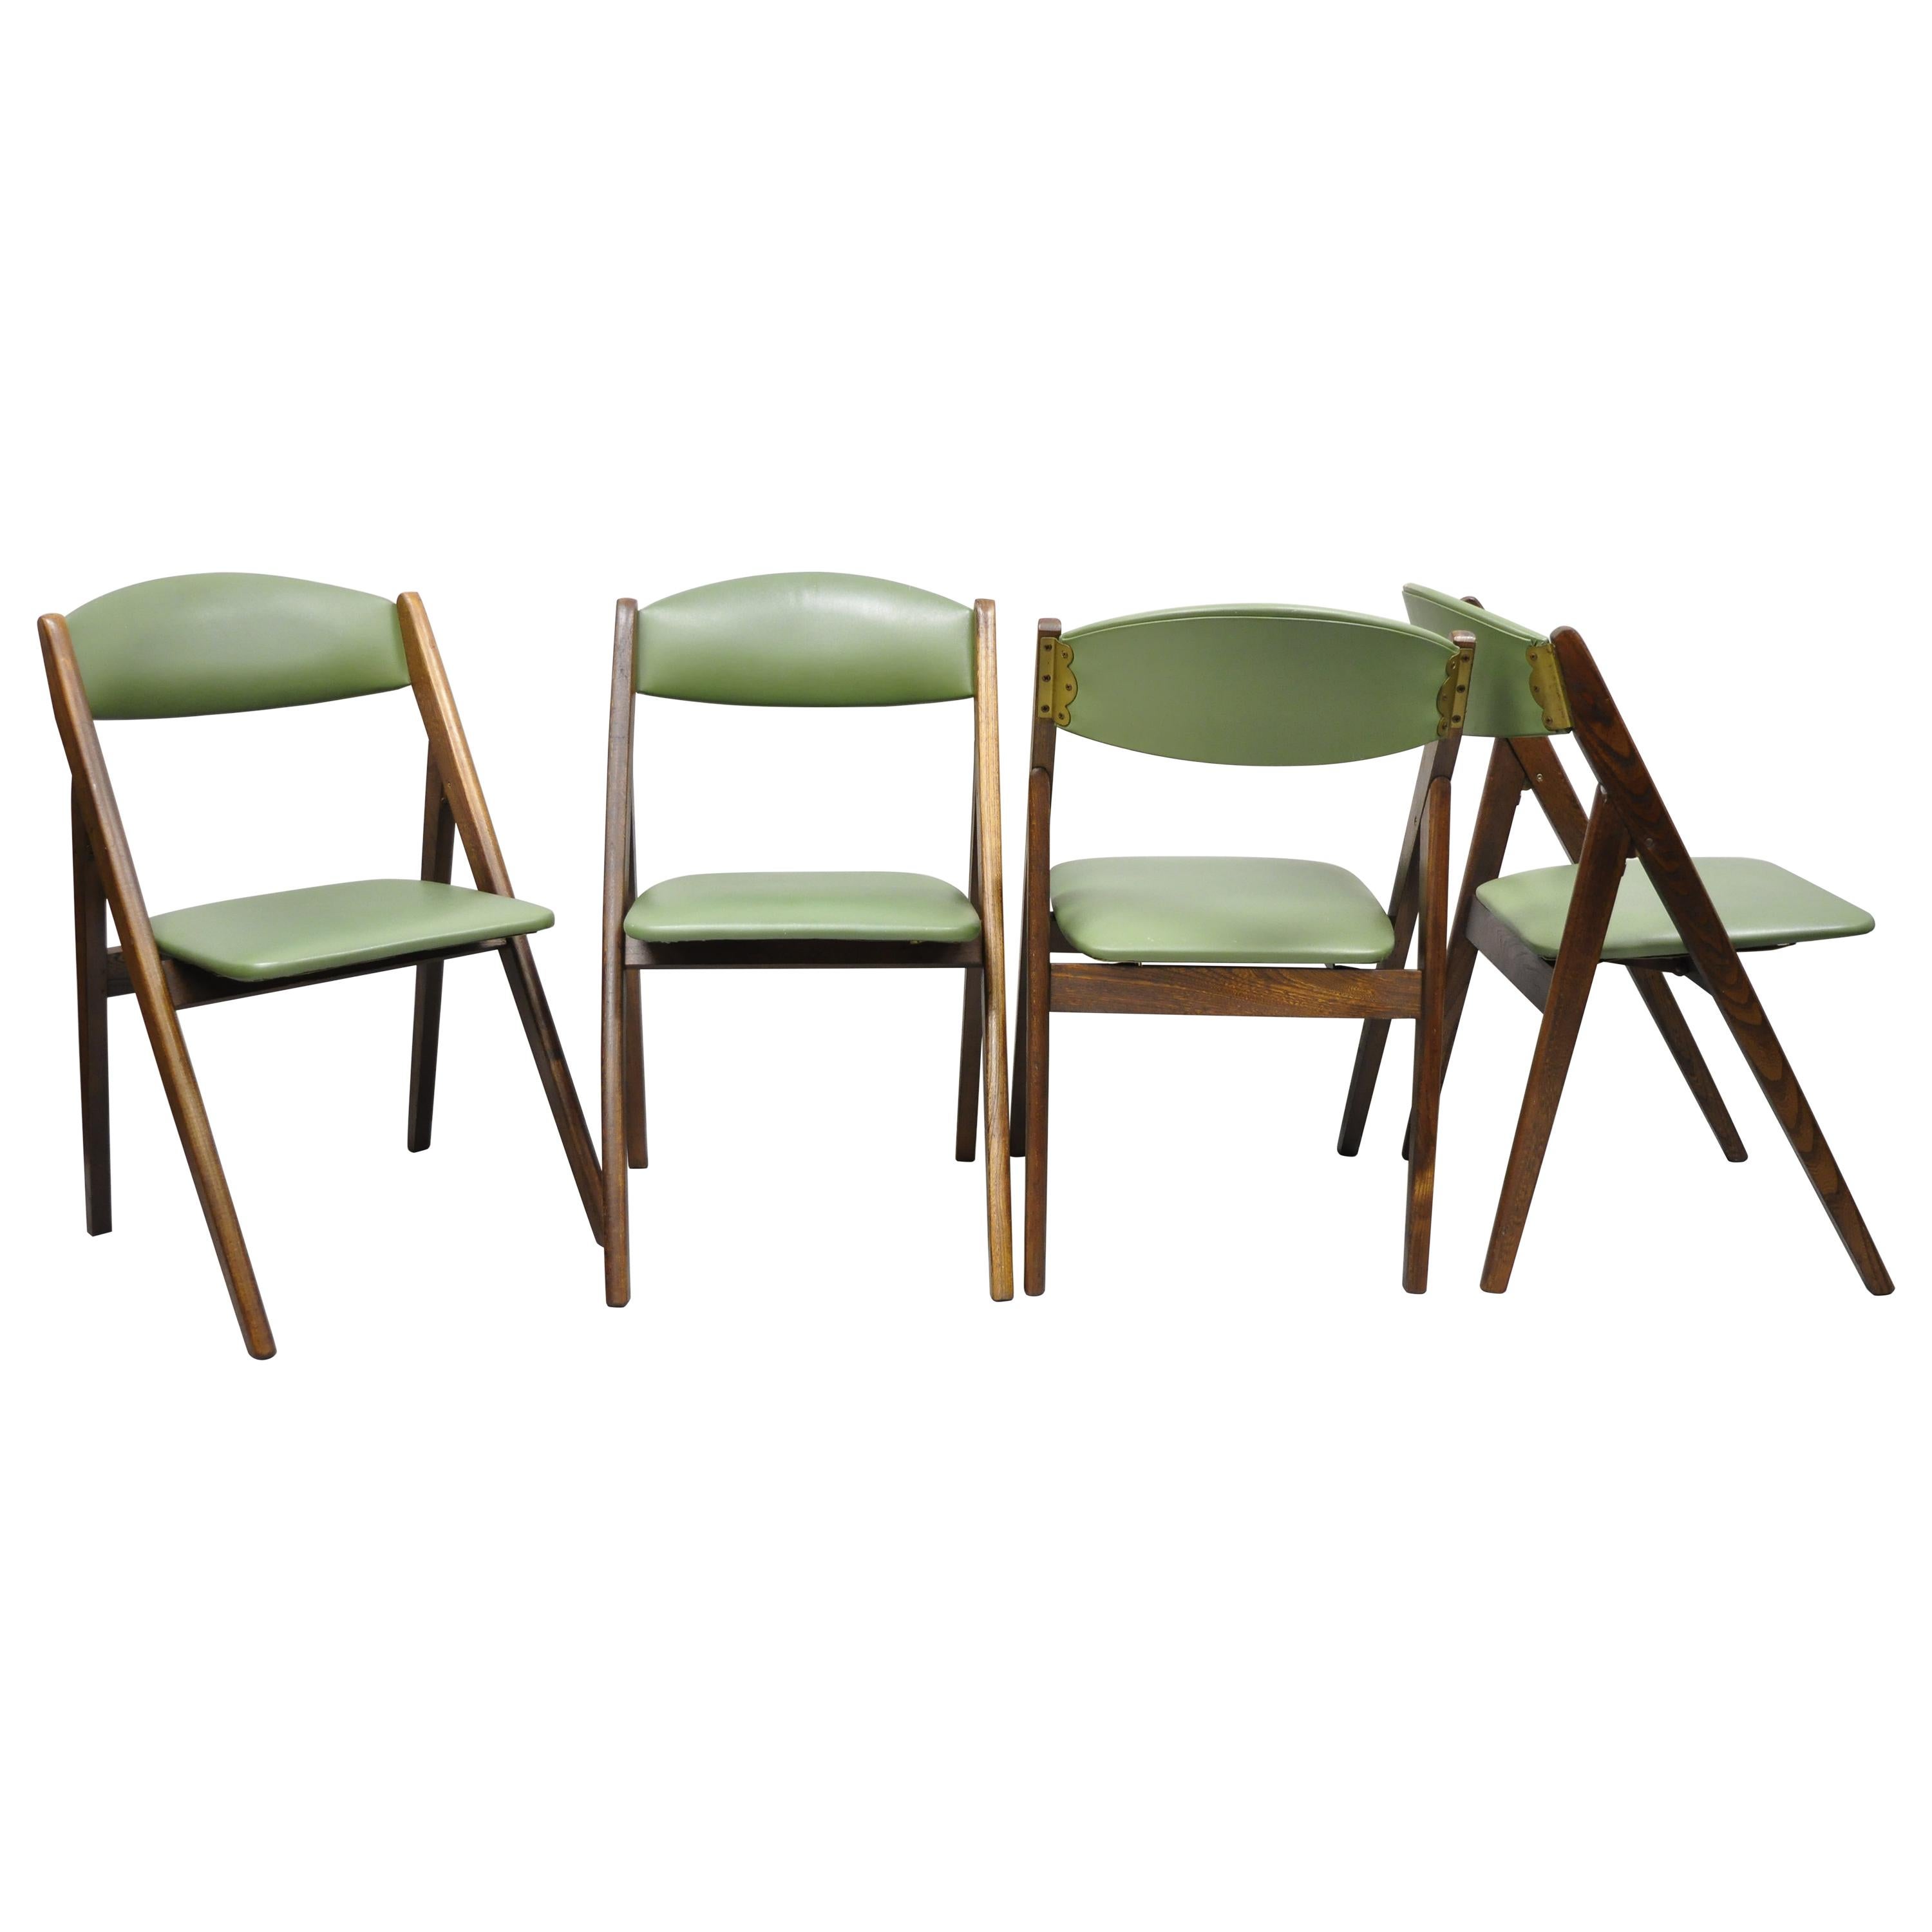 Vintage Mid Century Stakmore Wood Folding Dining Game Table Chairs, Set of 4